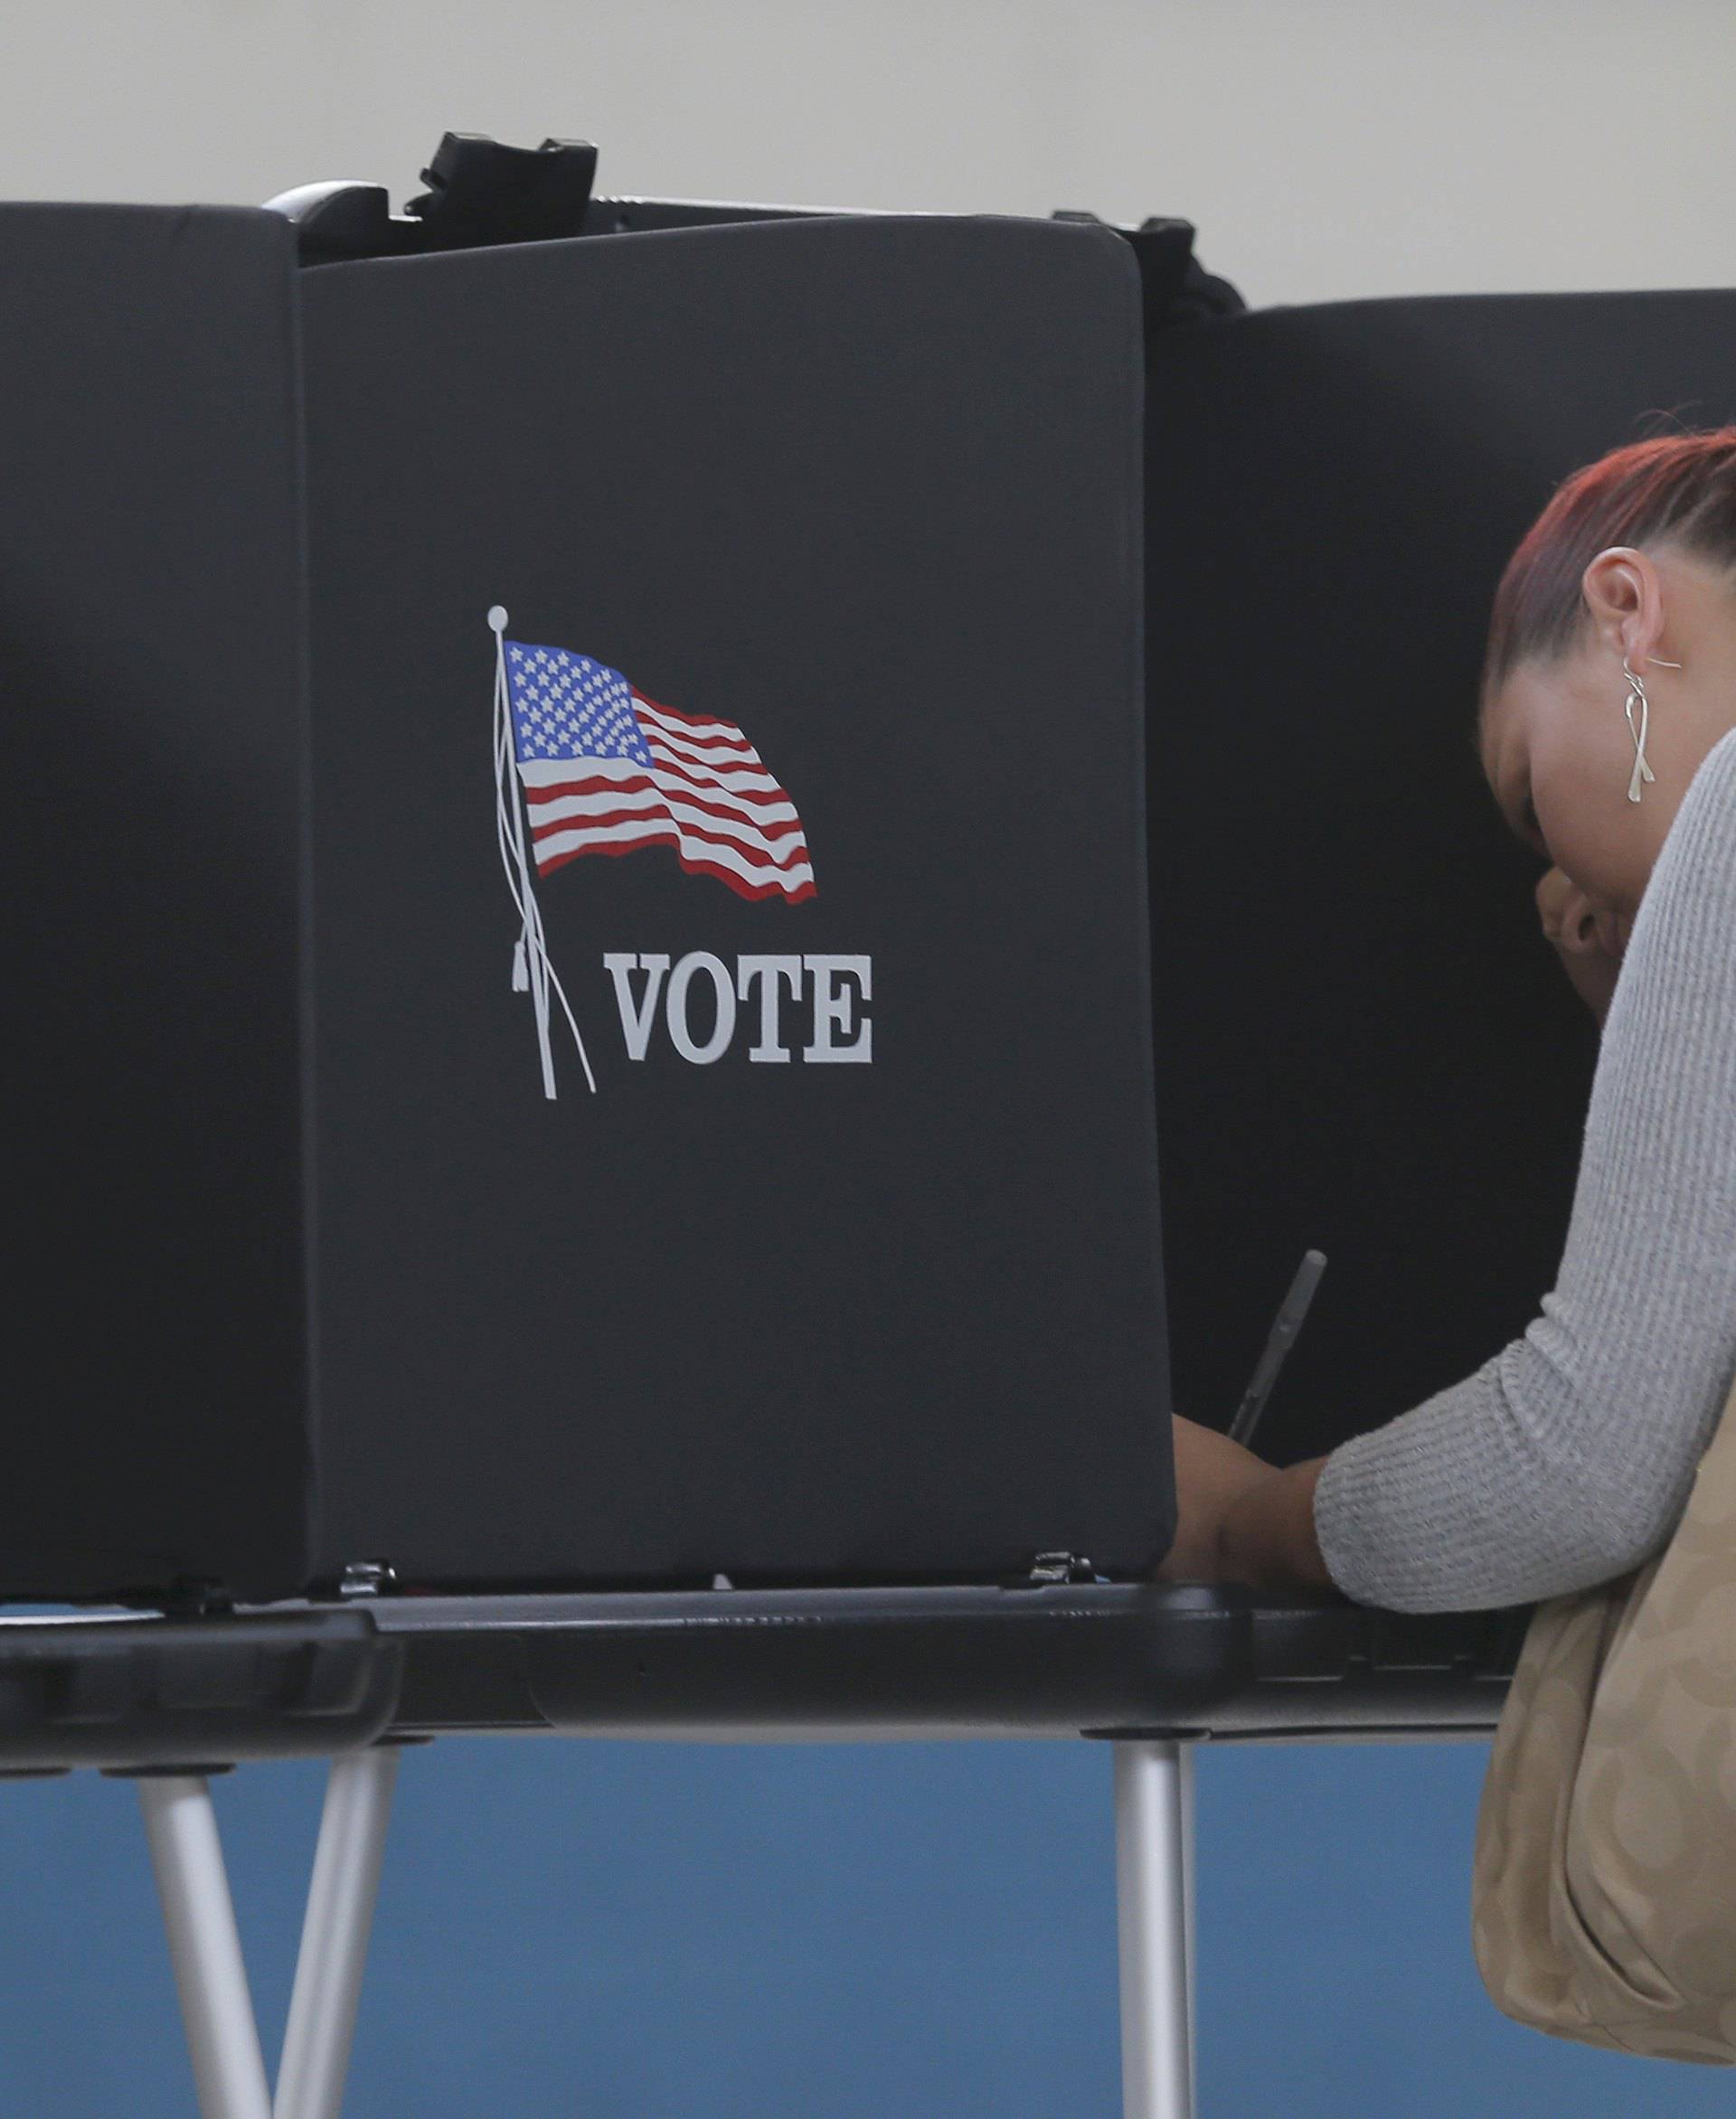 Melissa Foye fills out her ballot as she votes in the U.S. presidential election at the National Guard Armory in Smithfield, North Carolina